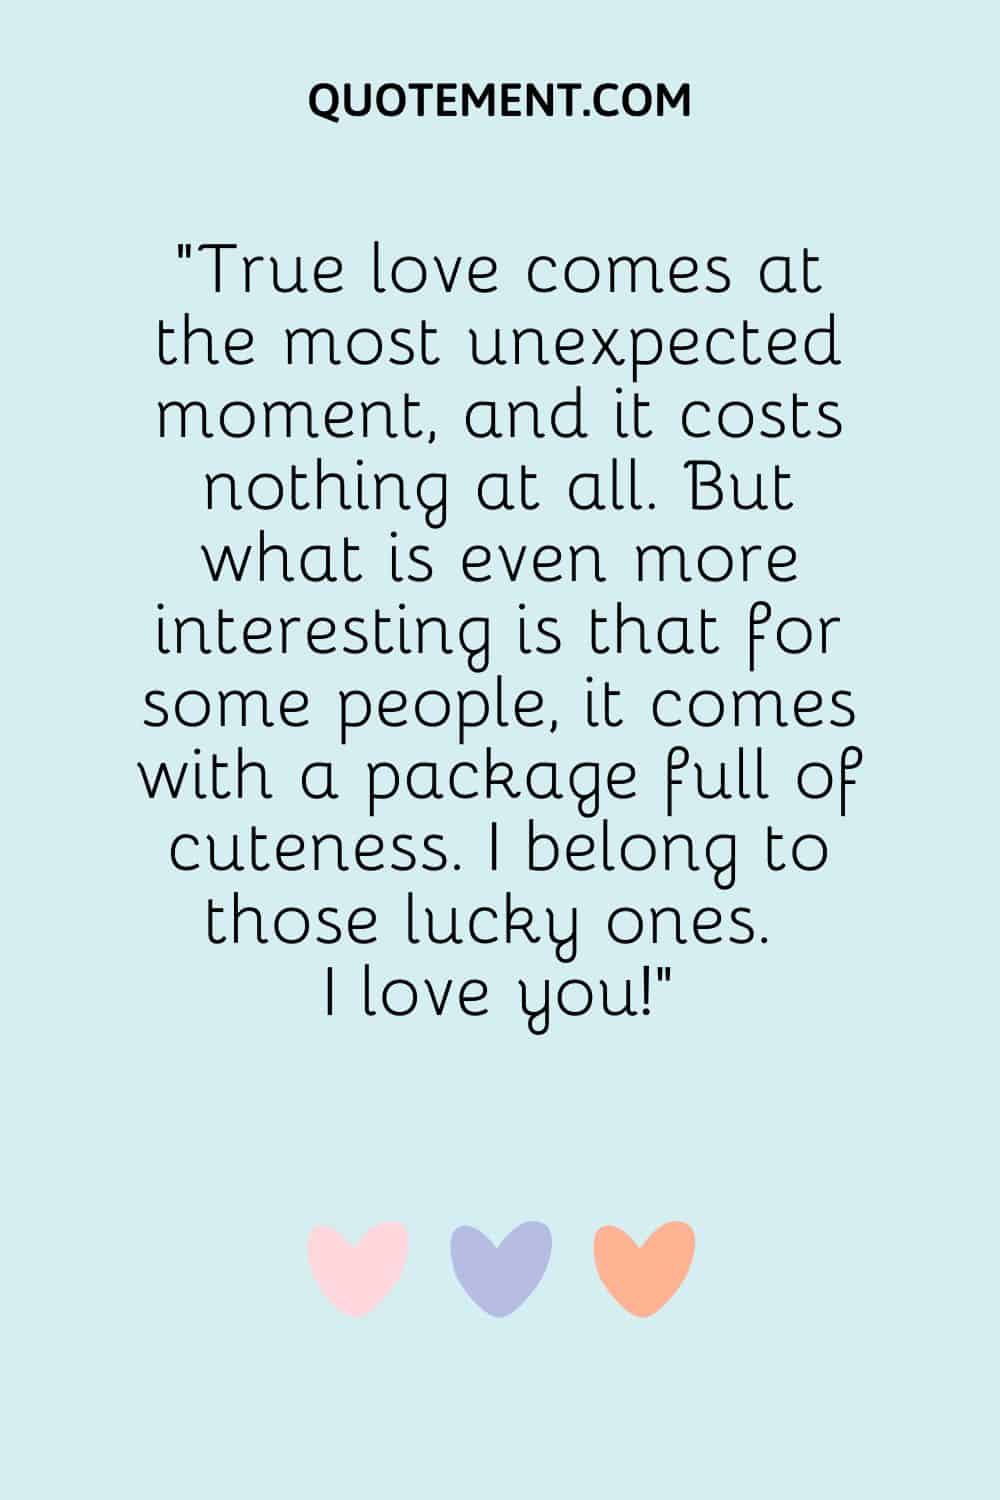 True love comes at the most unexpected moment, and it costs nothing at all